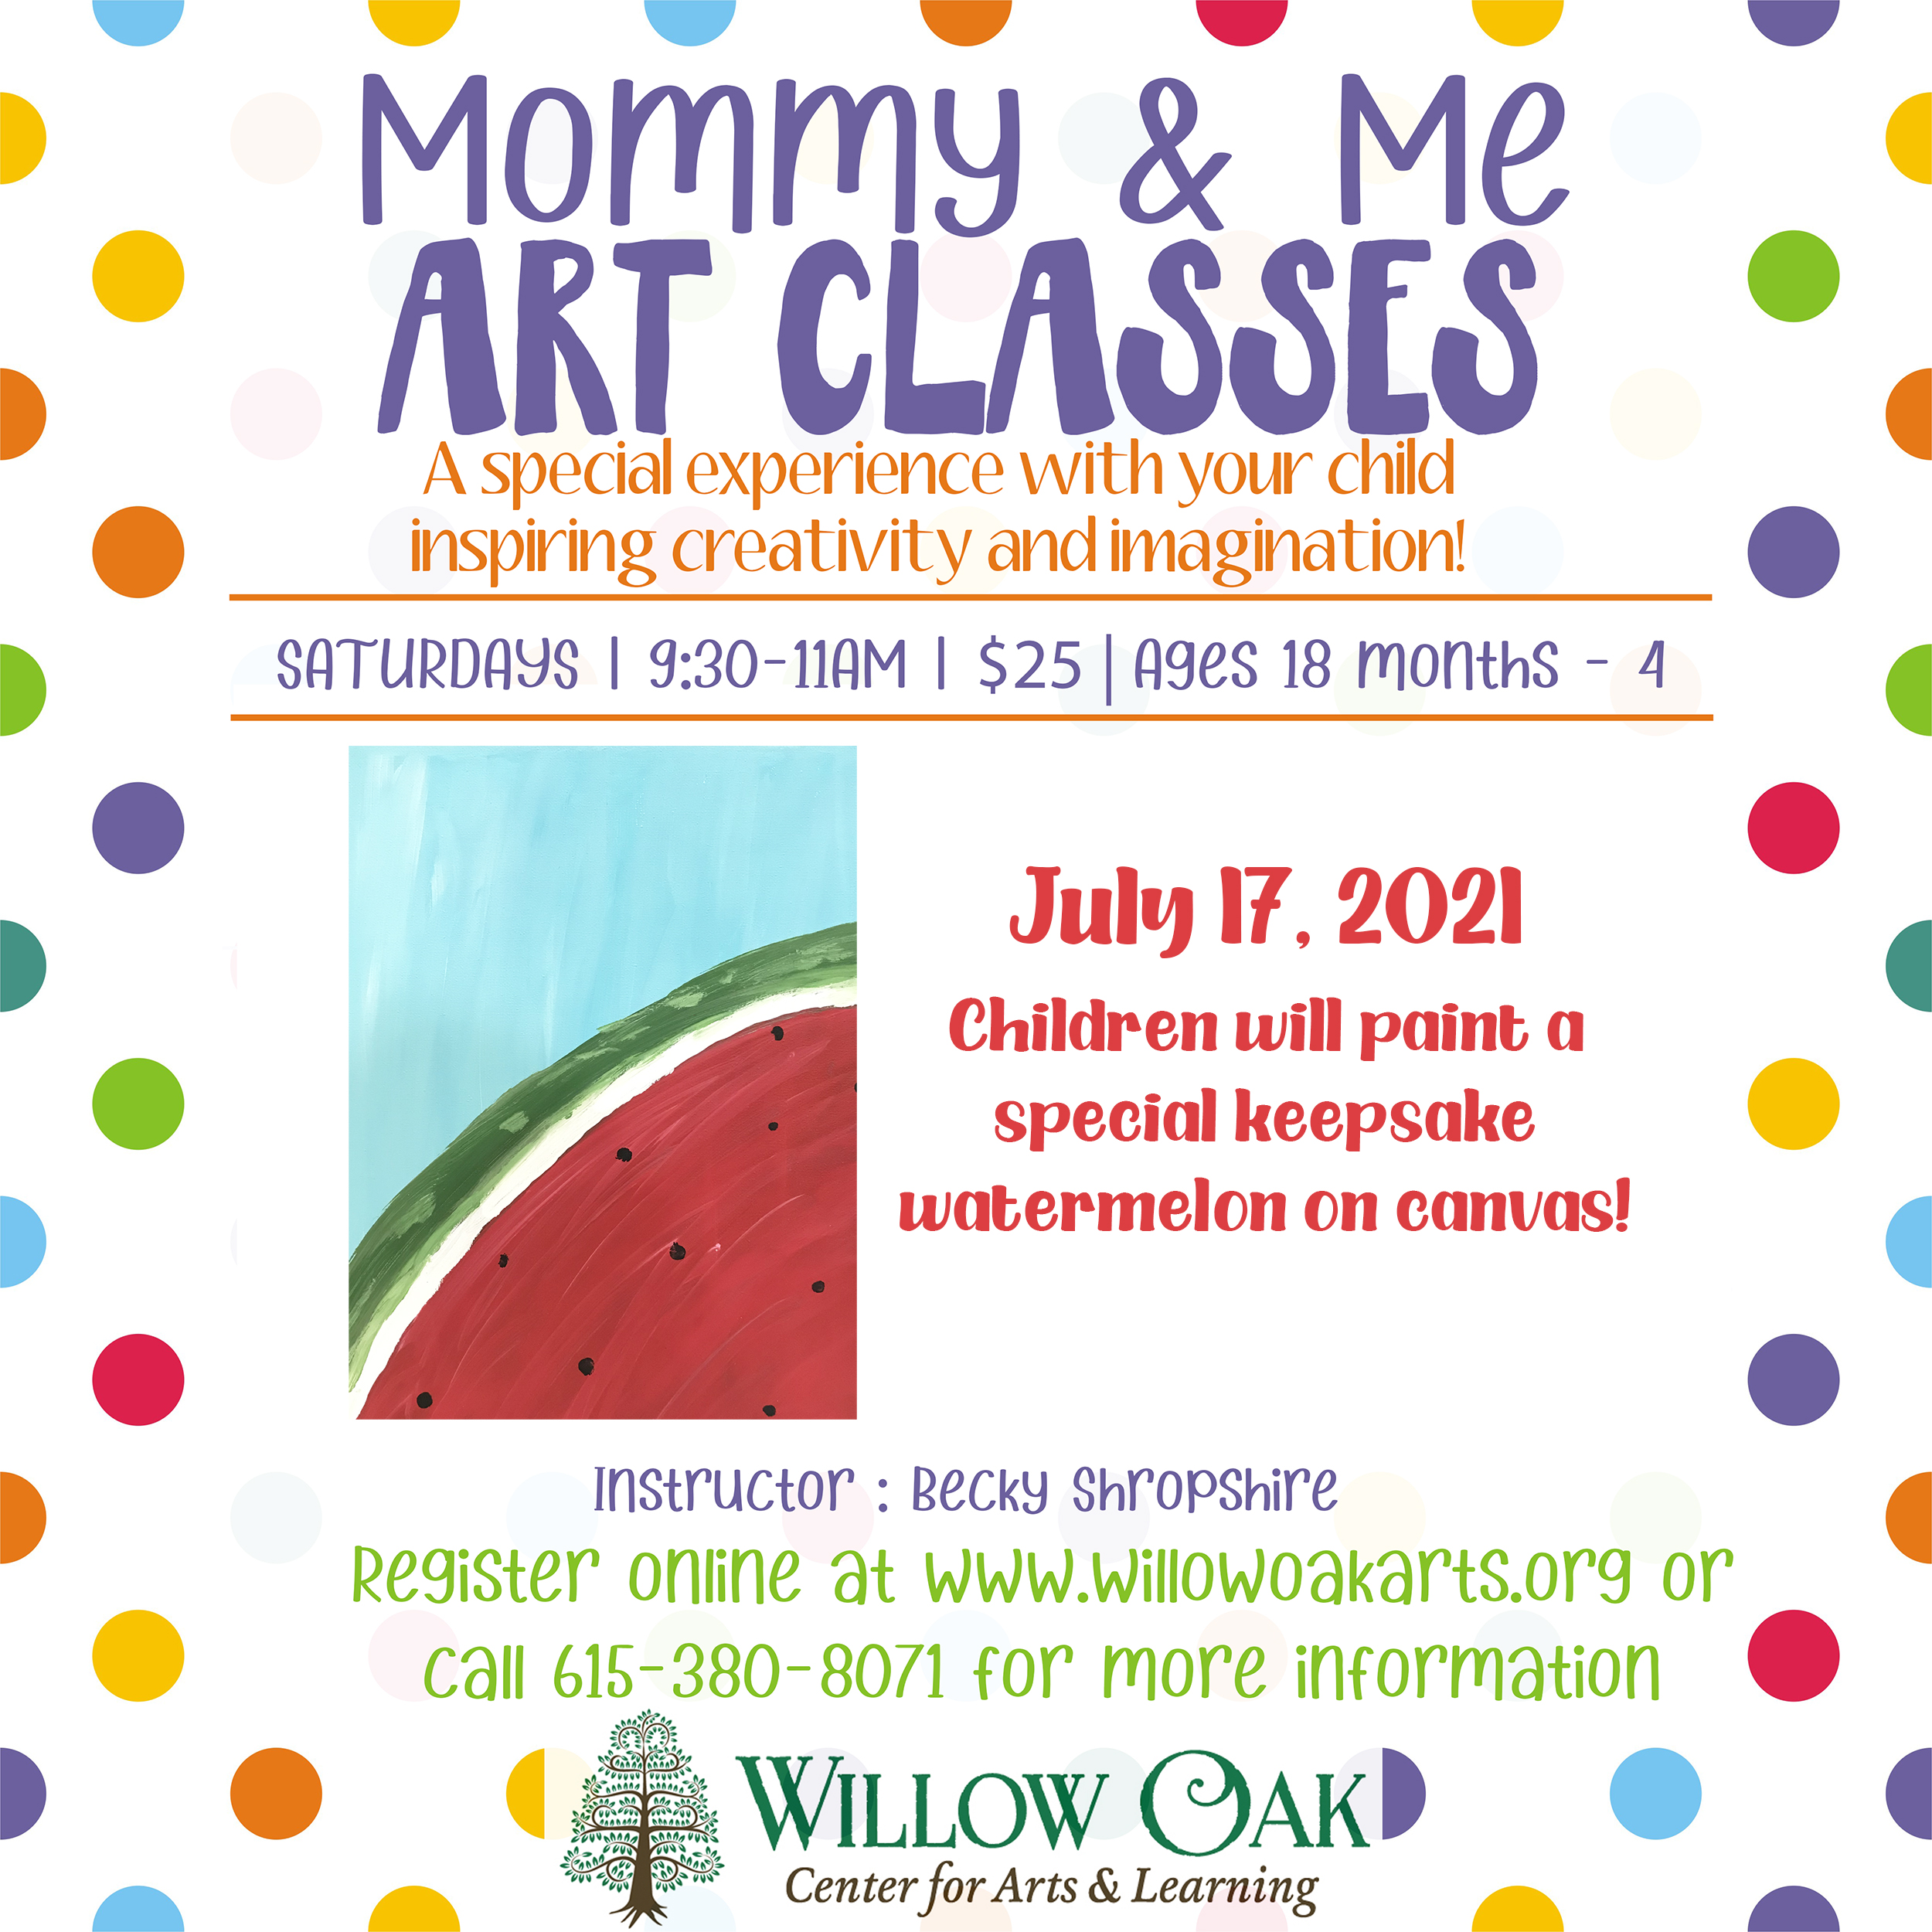 Mommy & Me Classes – Willow Oak Center for Arts & Learning